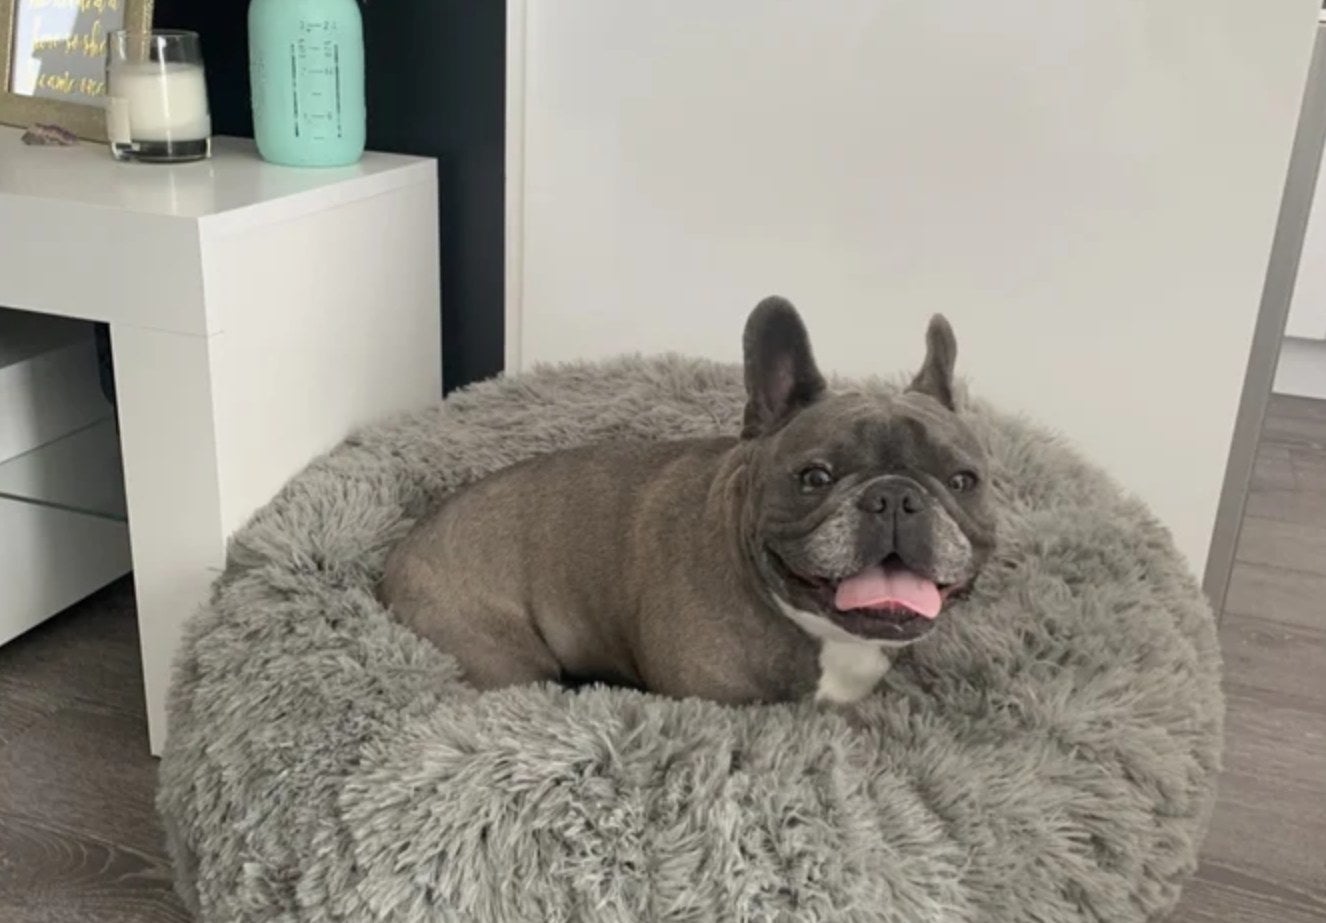 A small gray dog sits in the plush grey bed